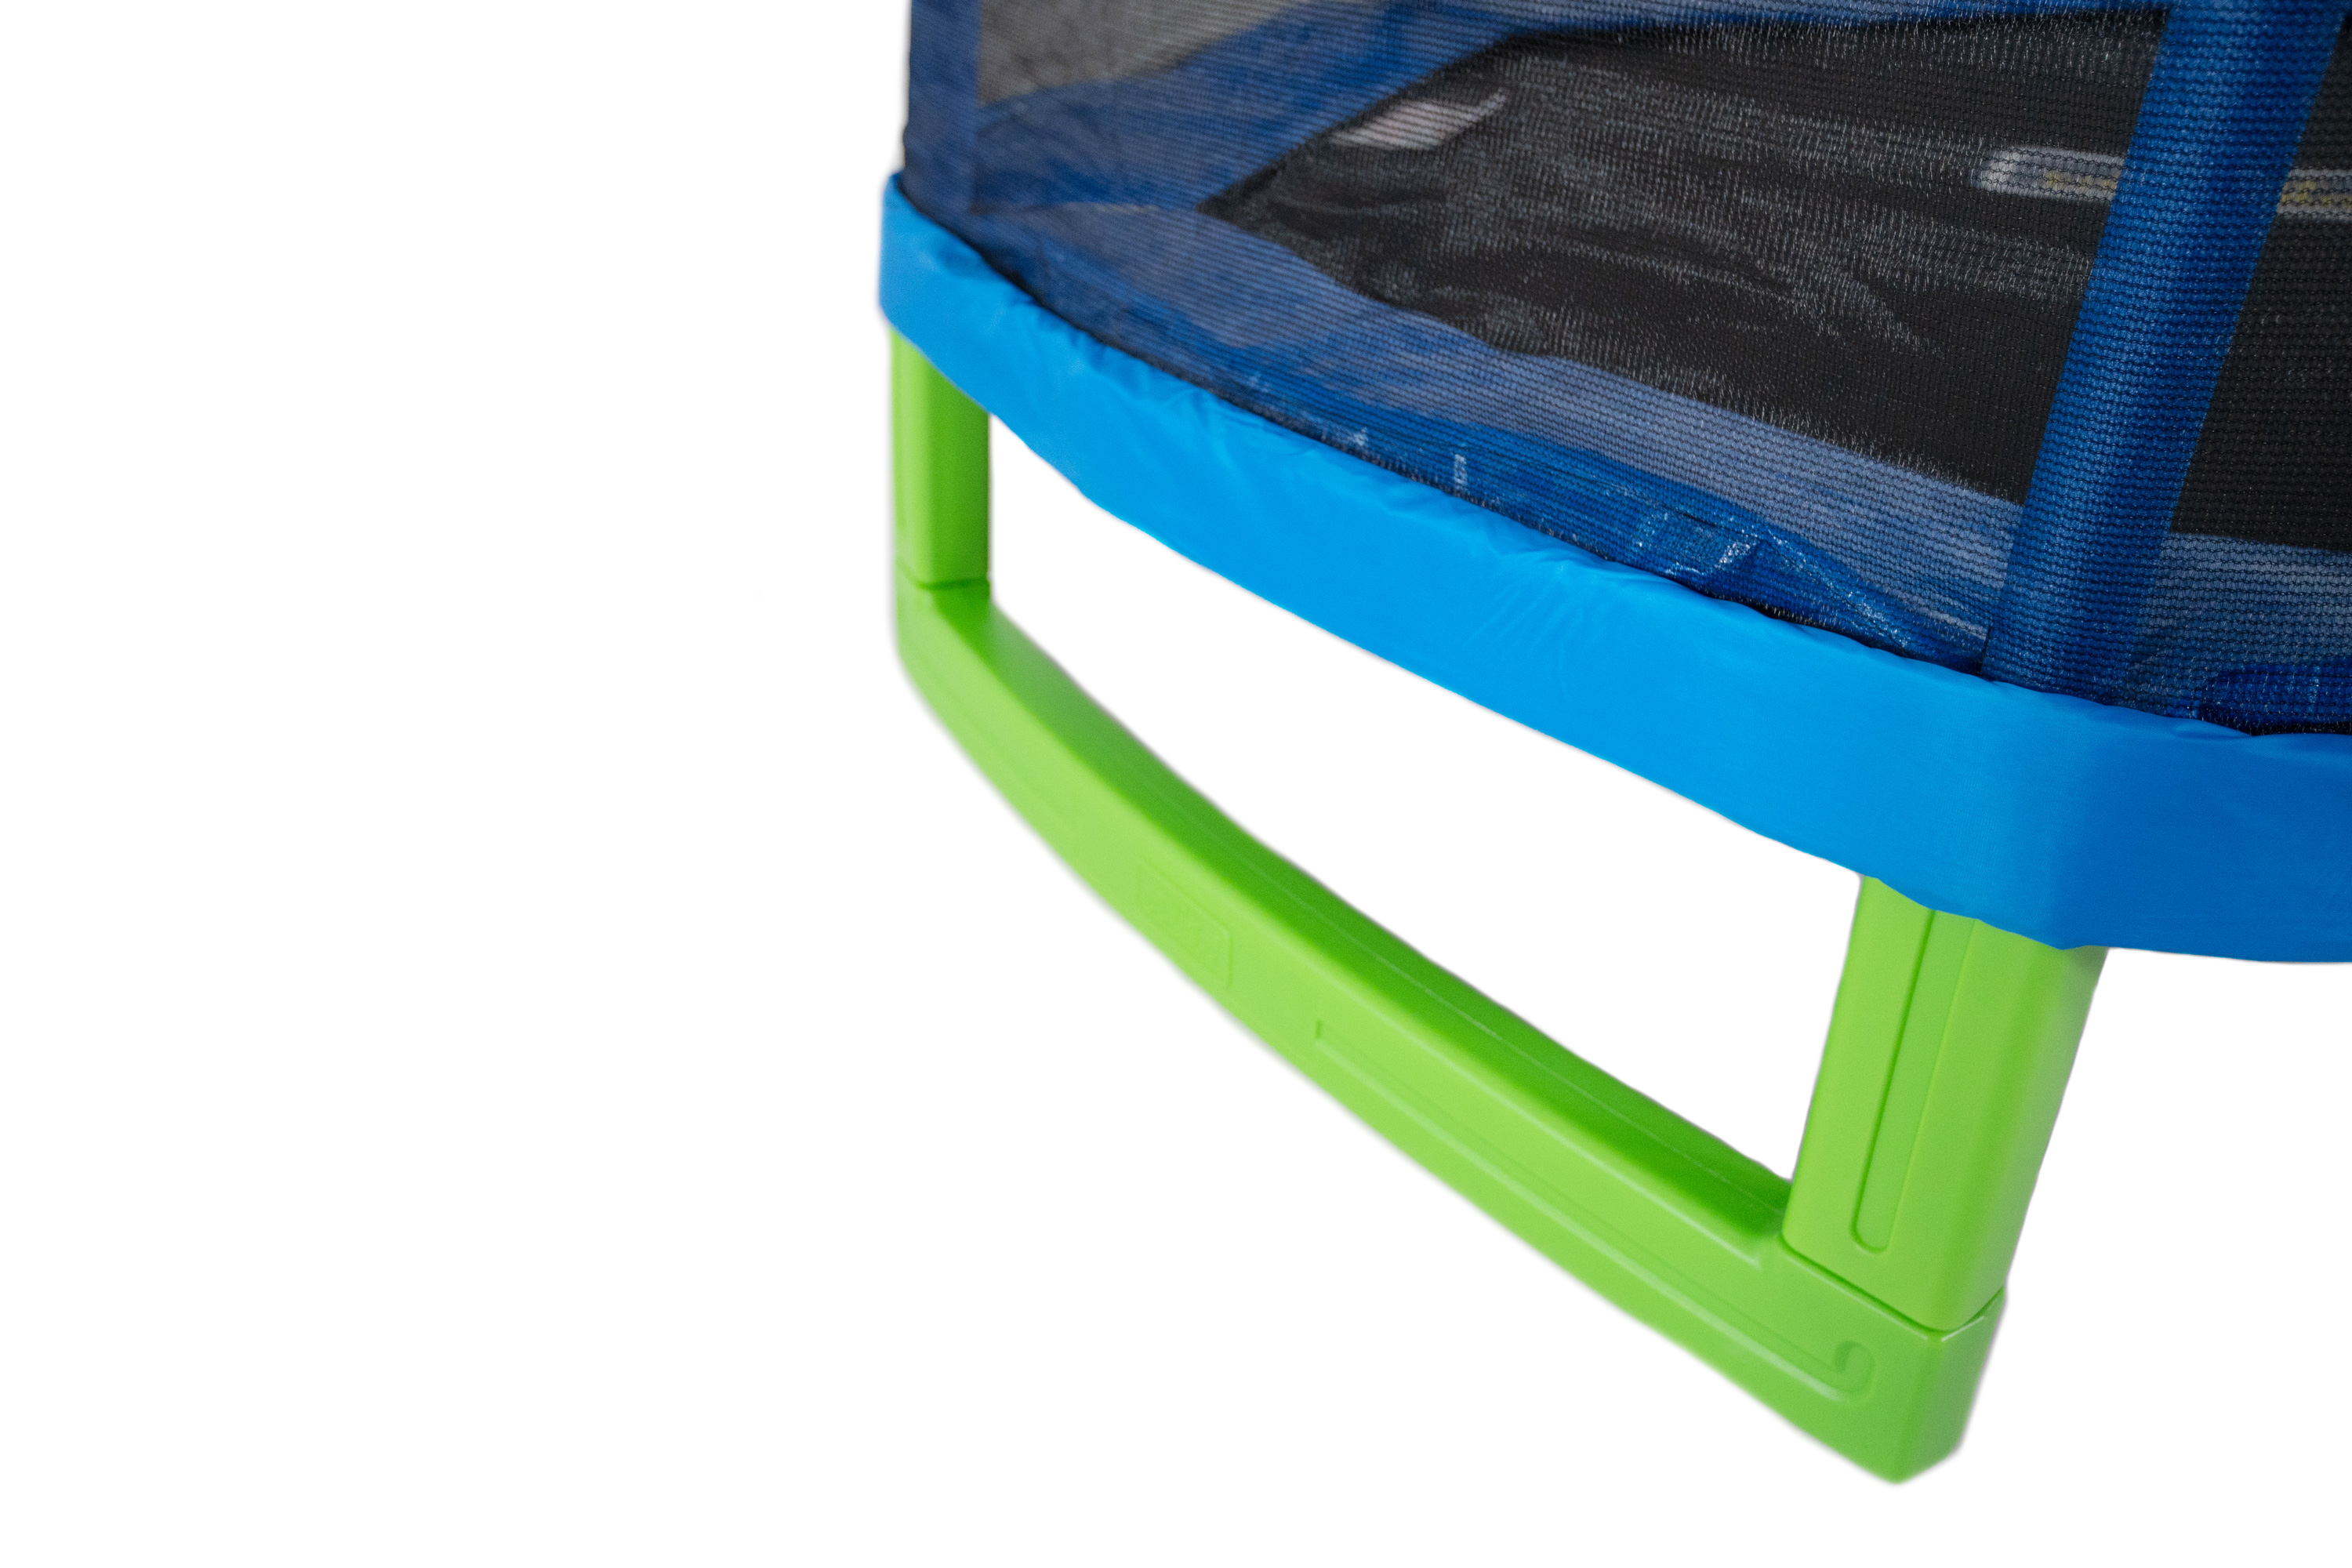 Bounce Pro 7-Foot My First Trampoline Hexagon (Ages 3-10) for Kids, Blue/Green - image 6 of 9